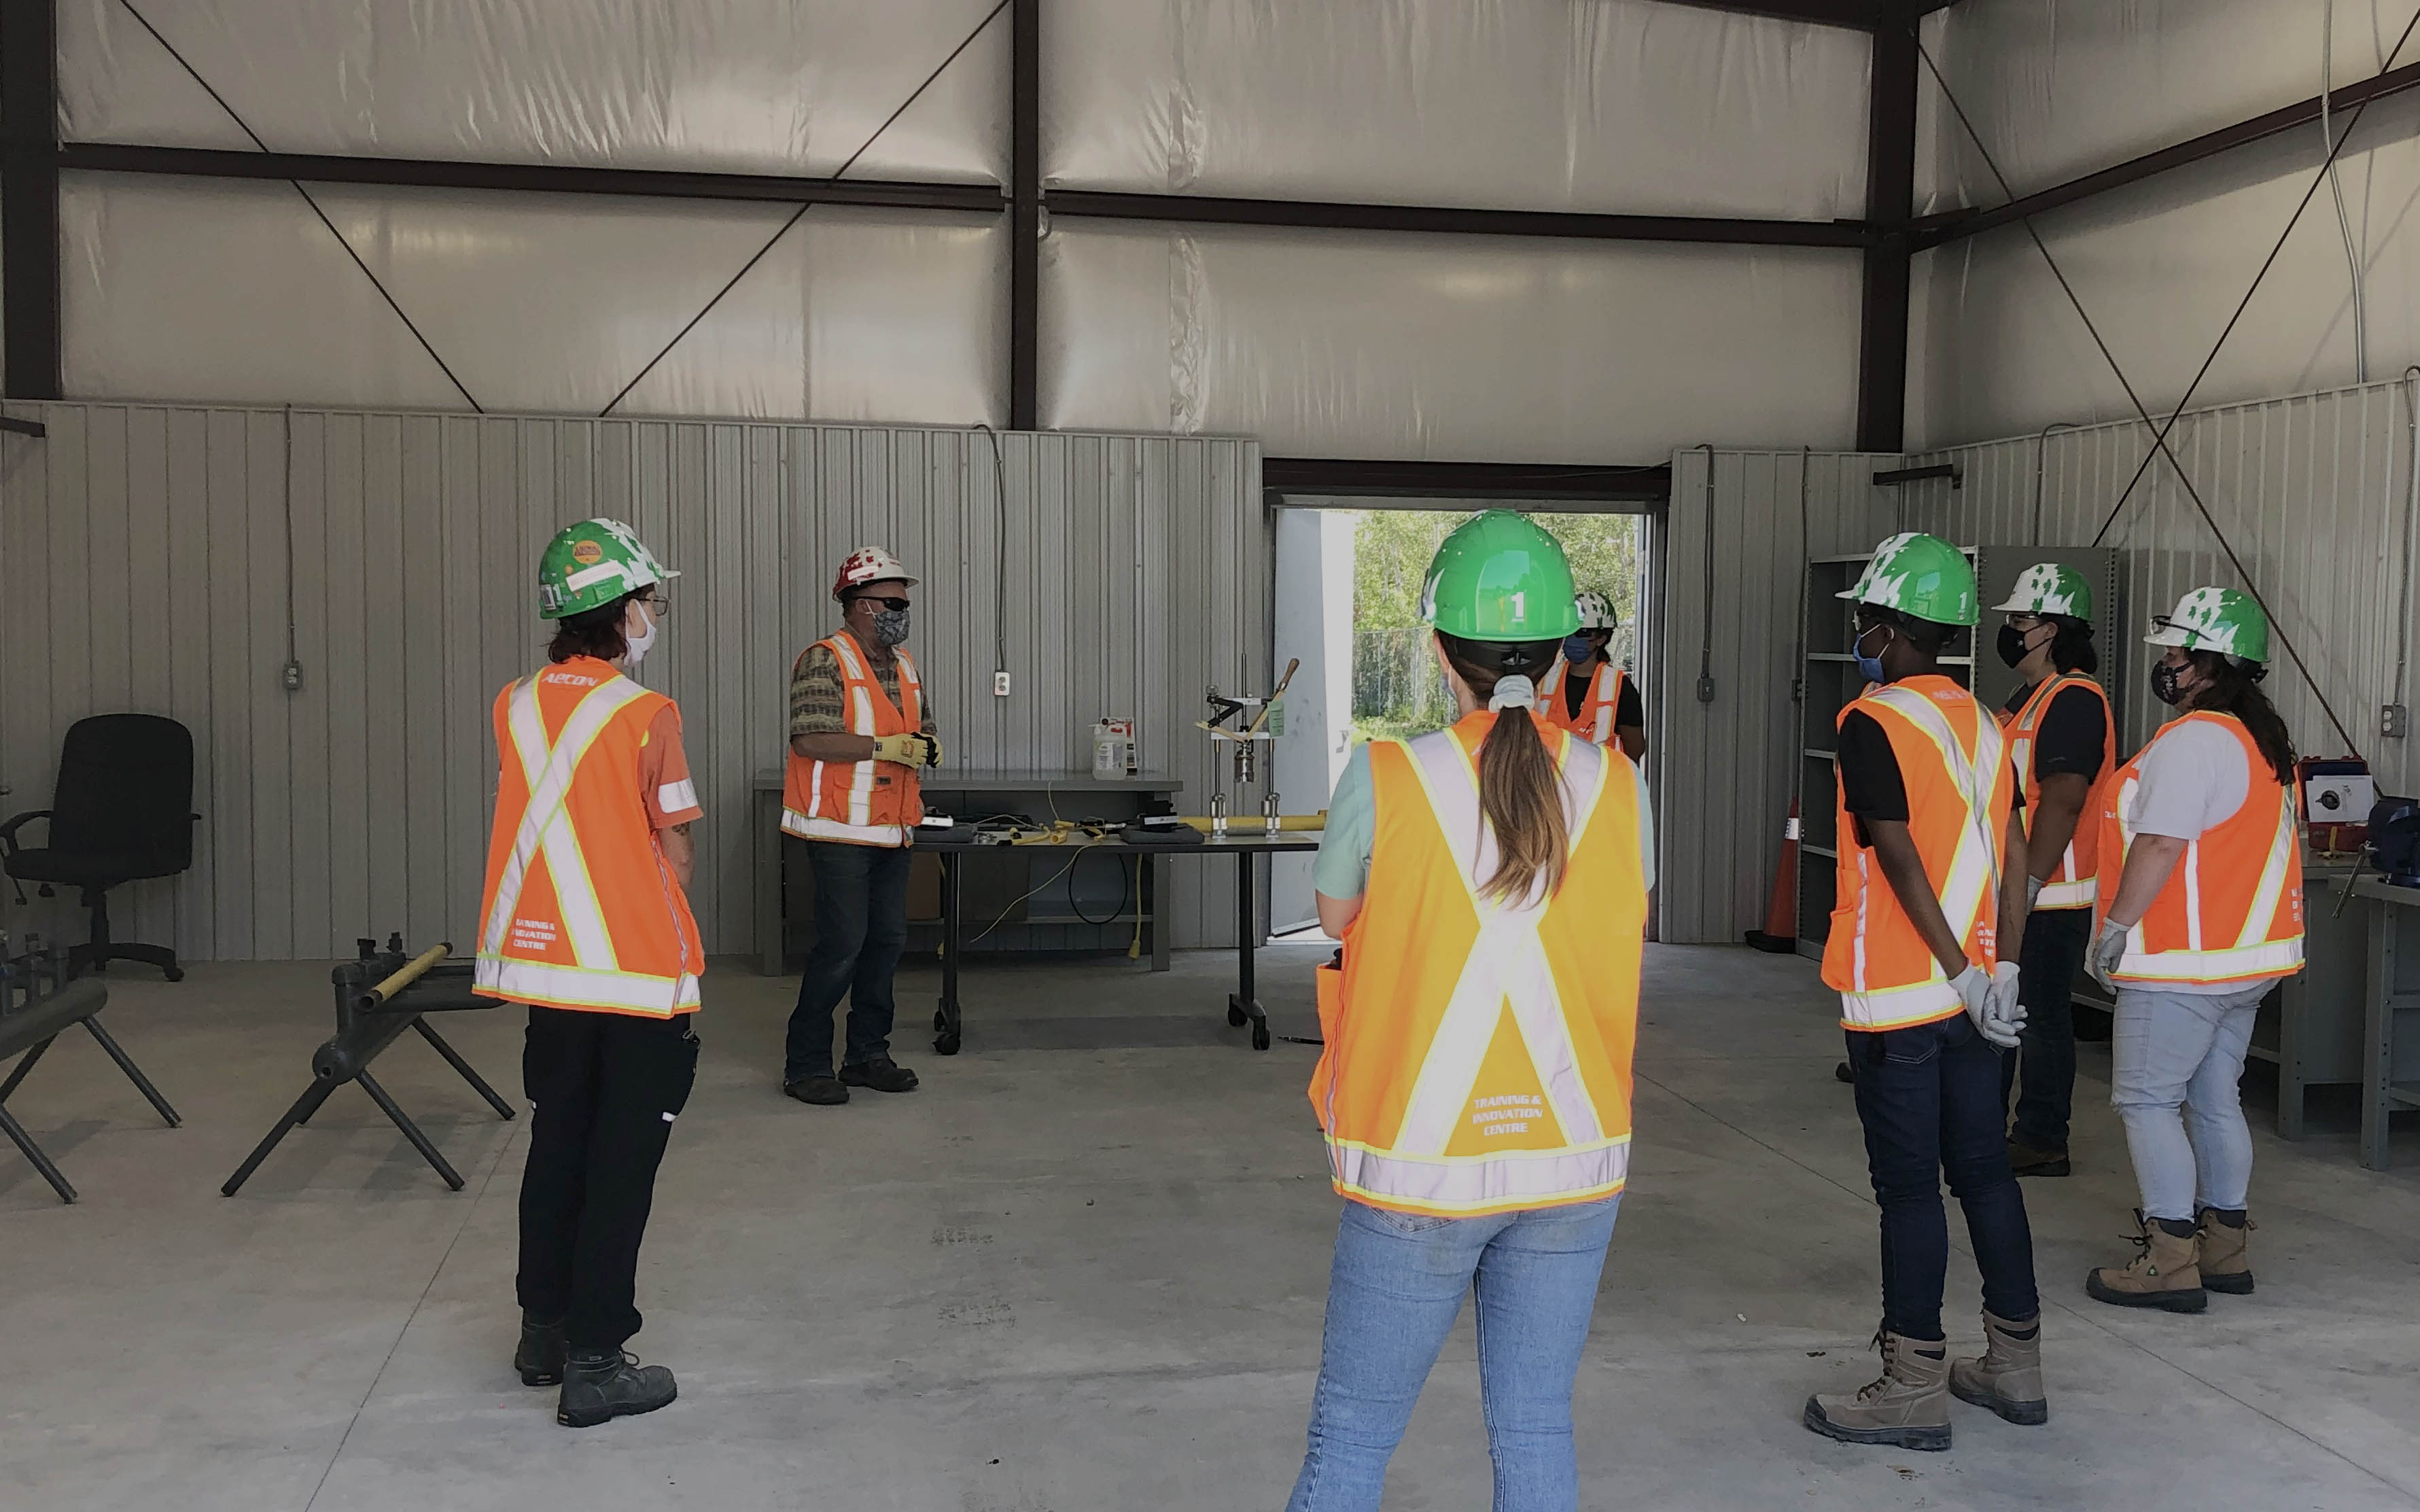 Aecon staff wearing safety gear and PPE on a site